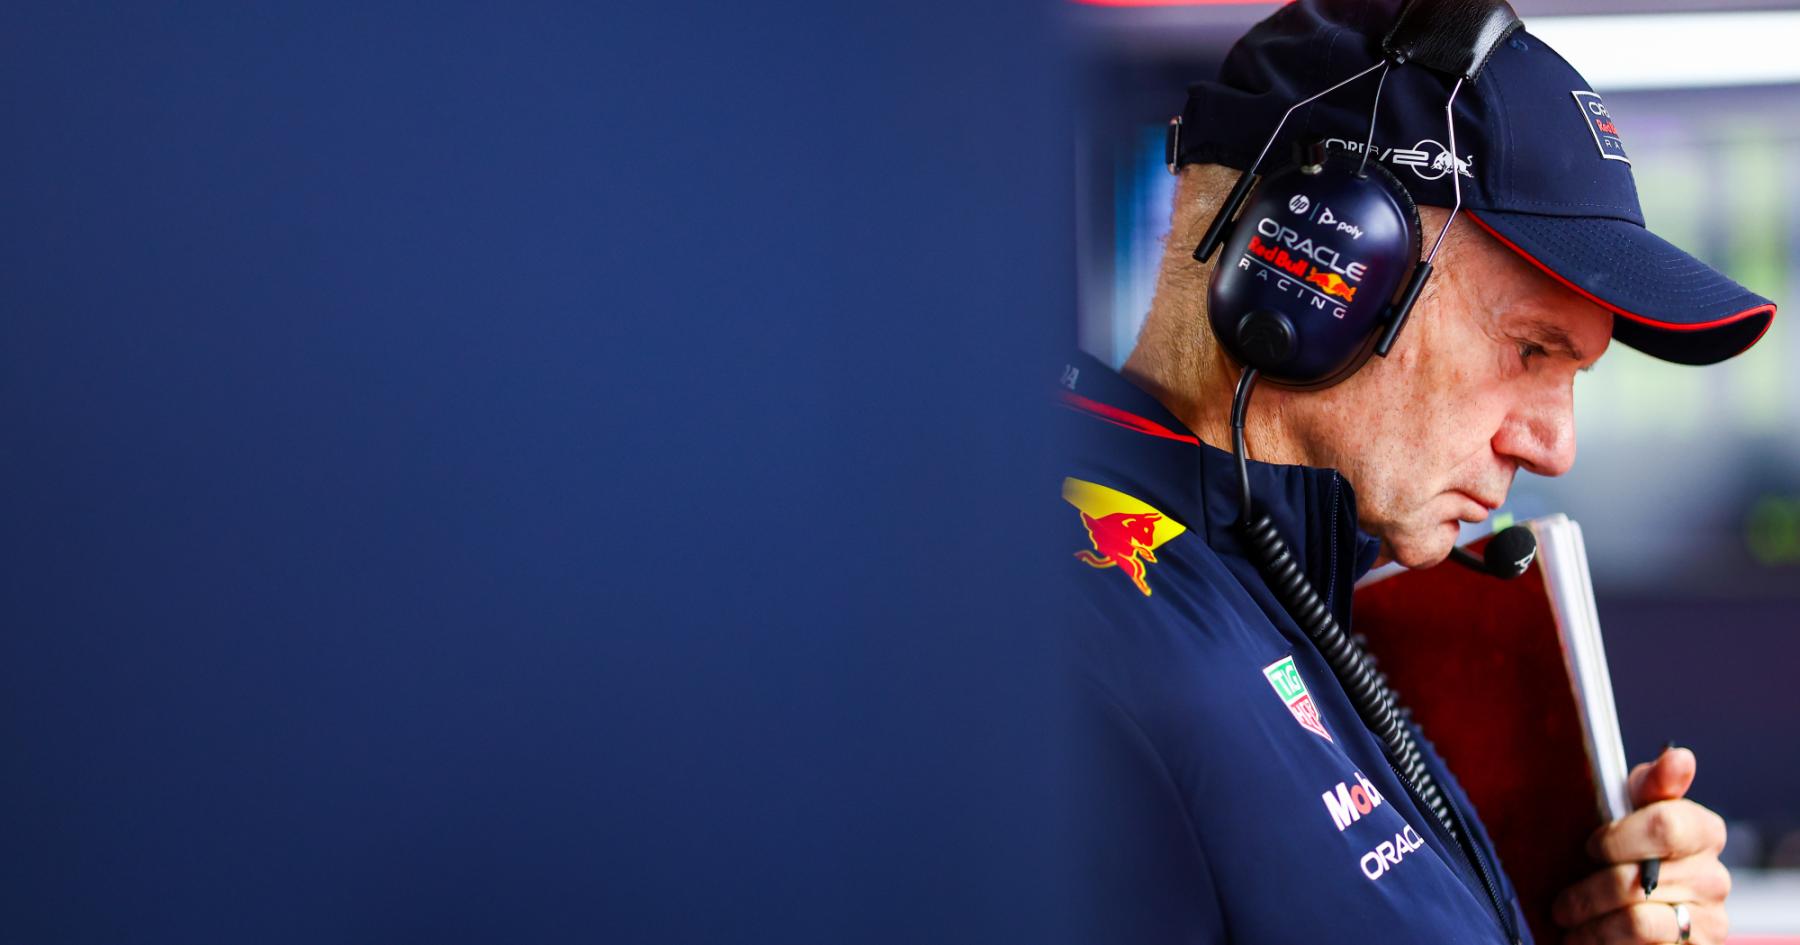 Destination of Choice: The Latest on Adrian Newey's Next Move Amid Red Bull Exit Rumors